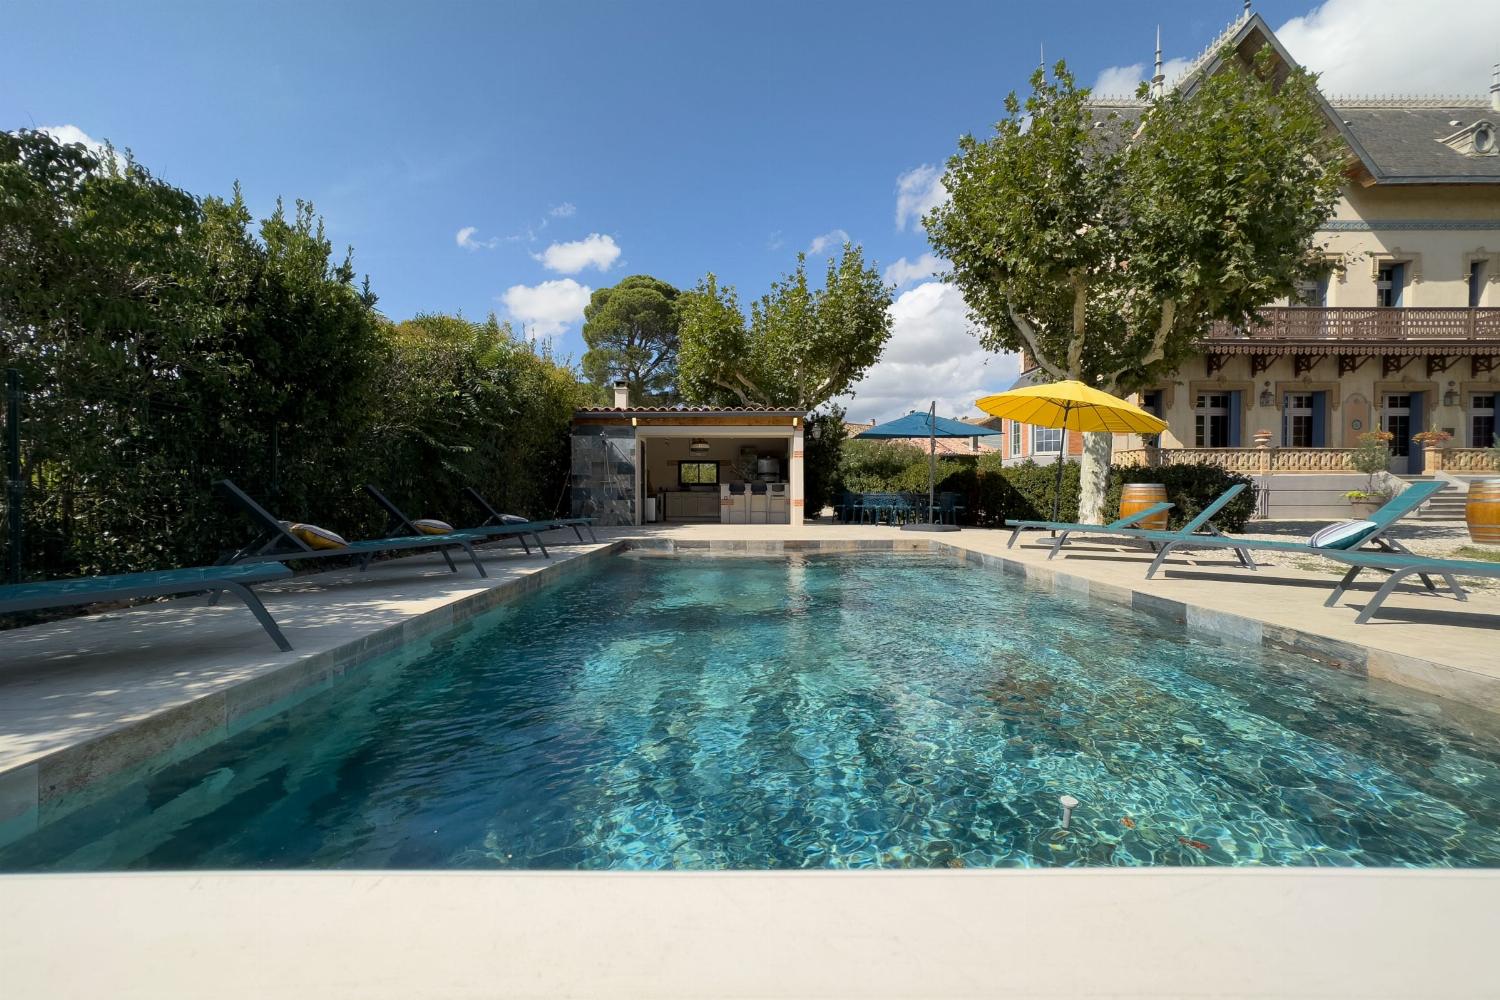 Private pool | Holiday château in the South of France